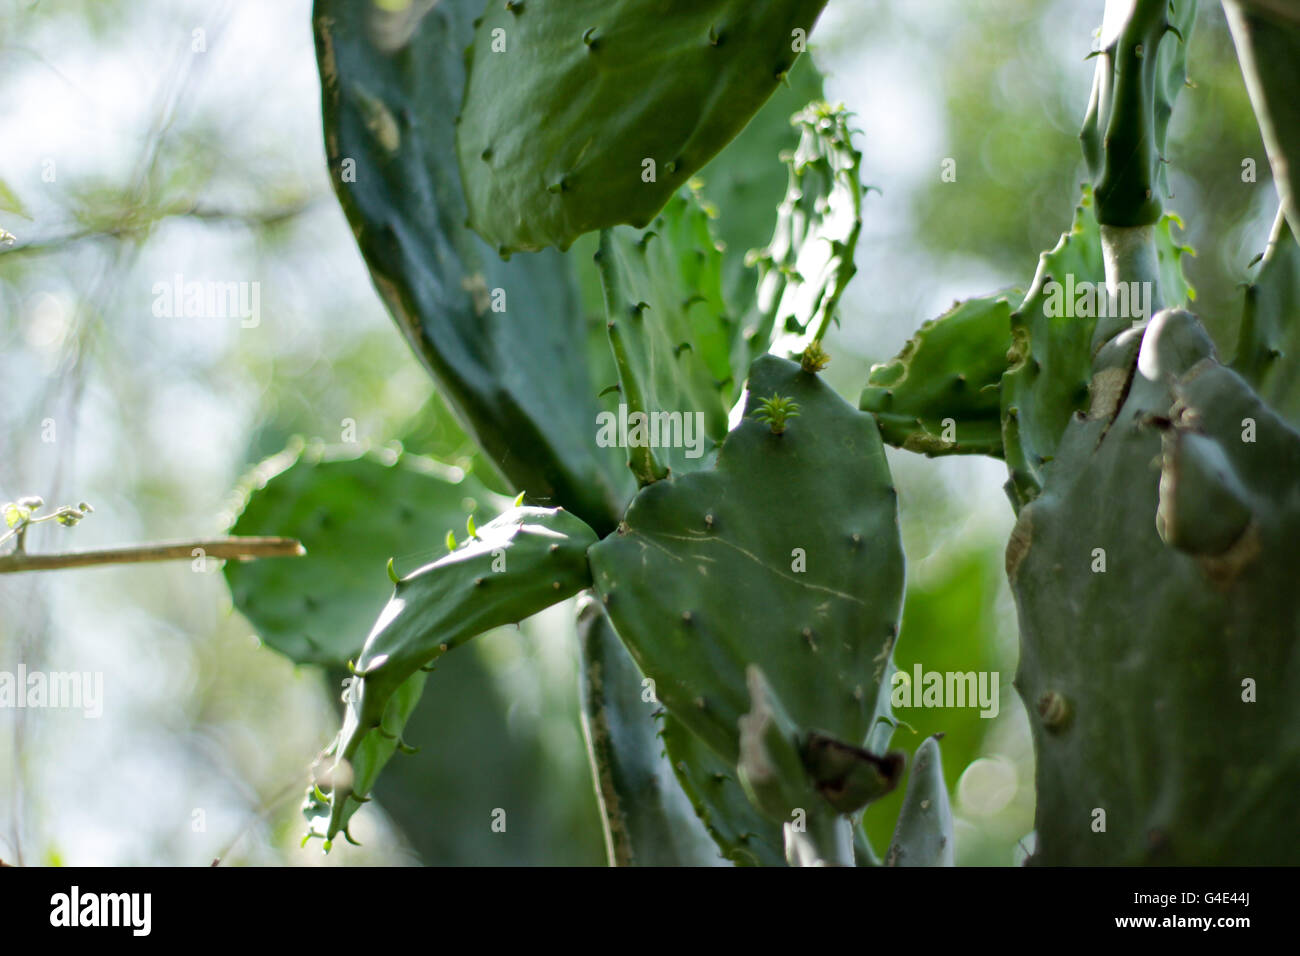 Photograph of a green cactus plant named nopal Stock Photo